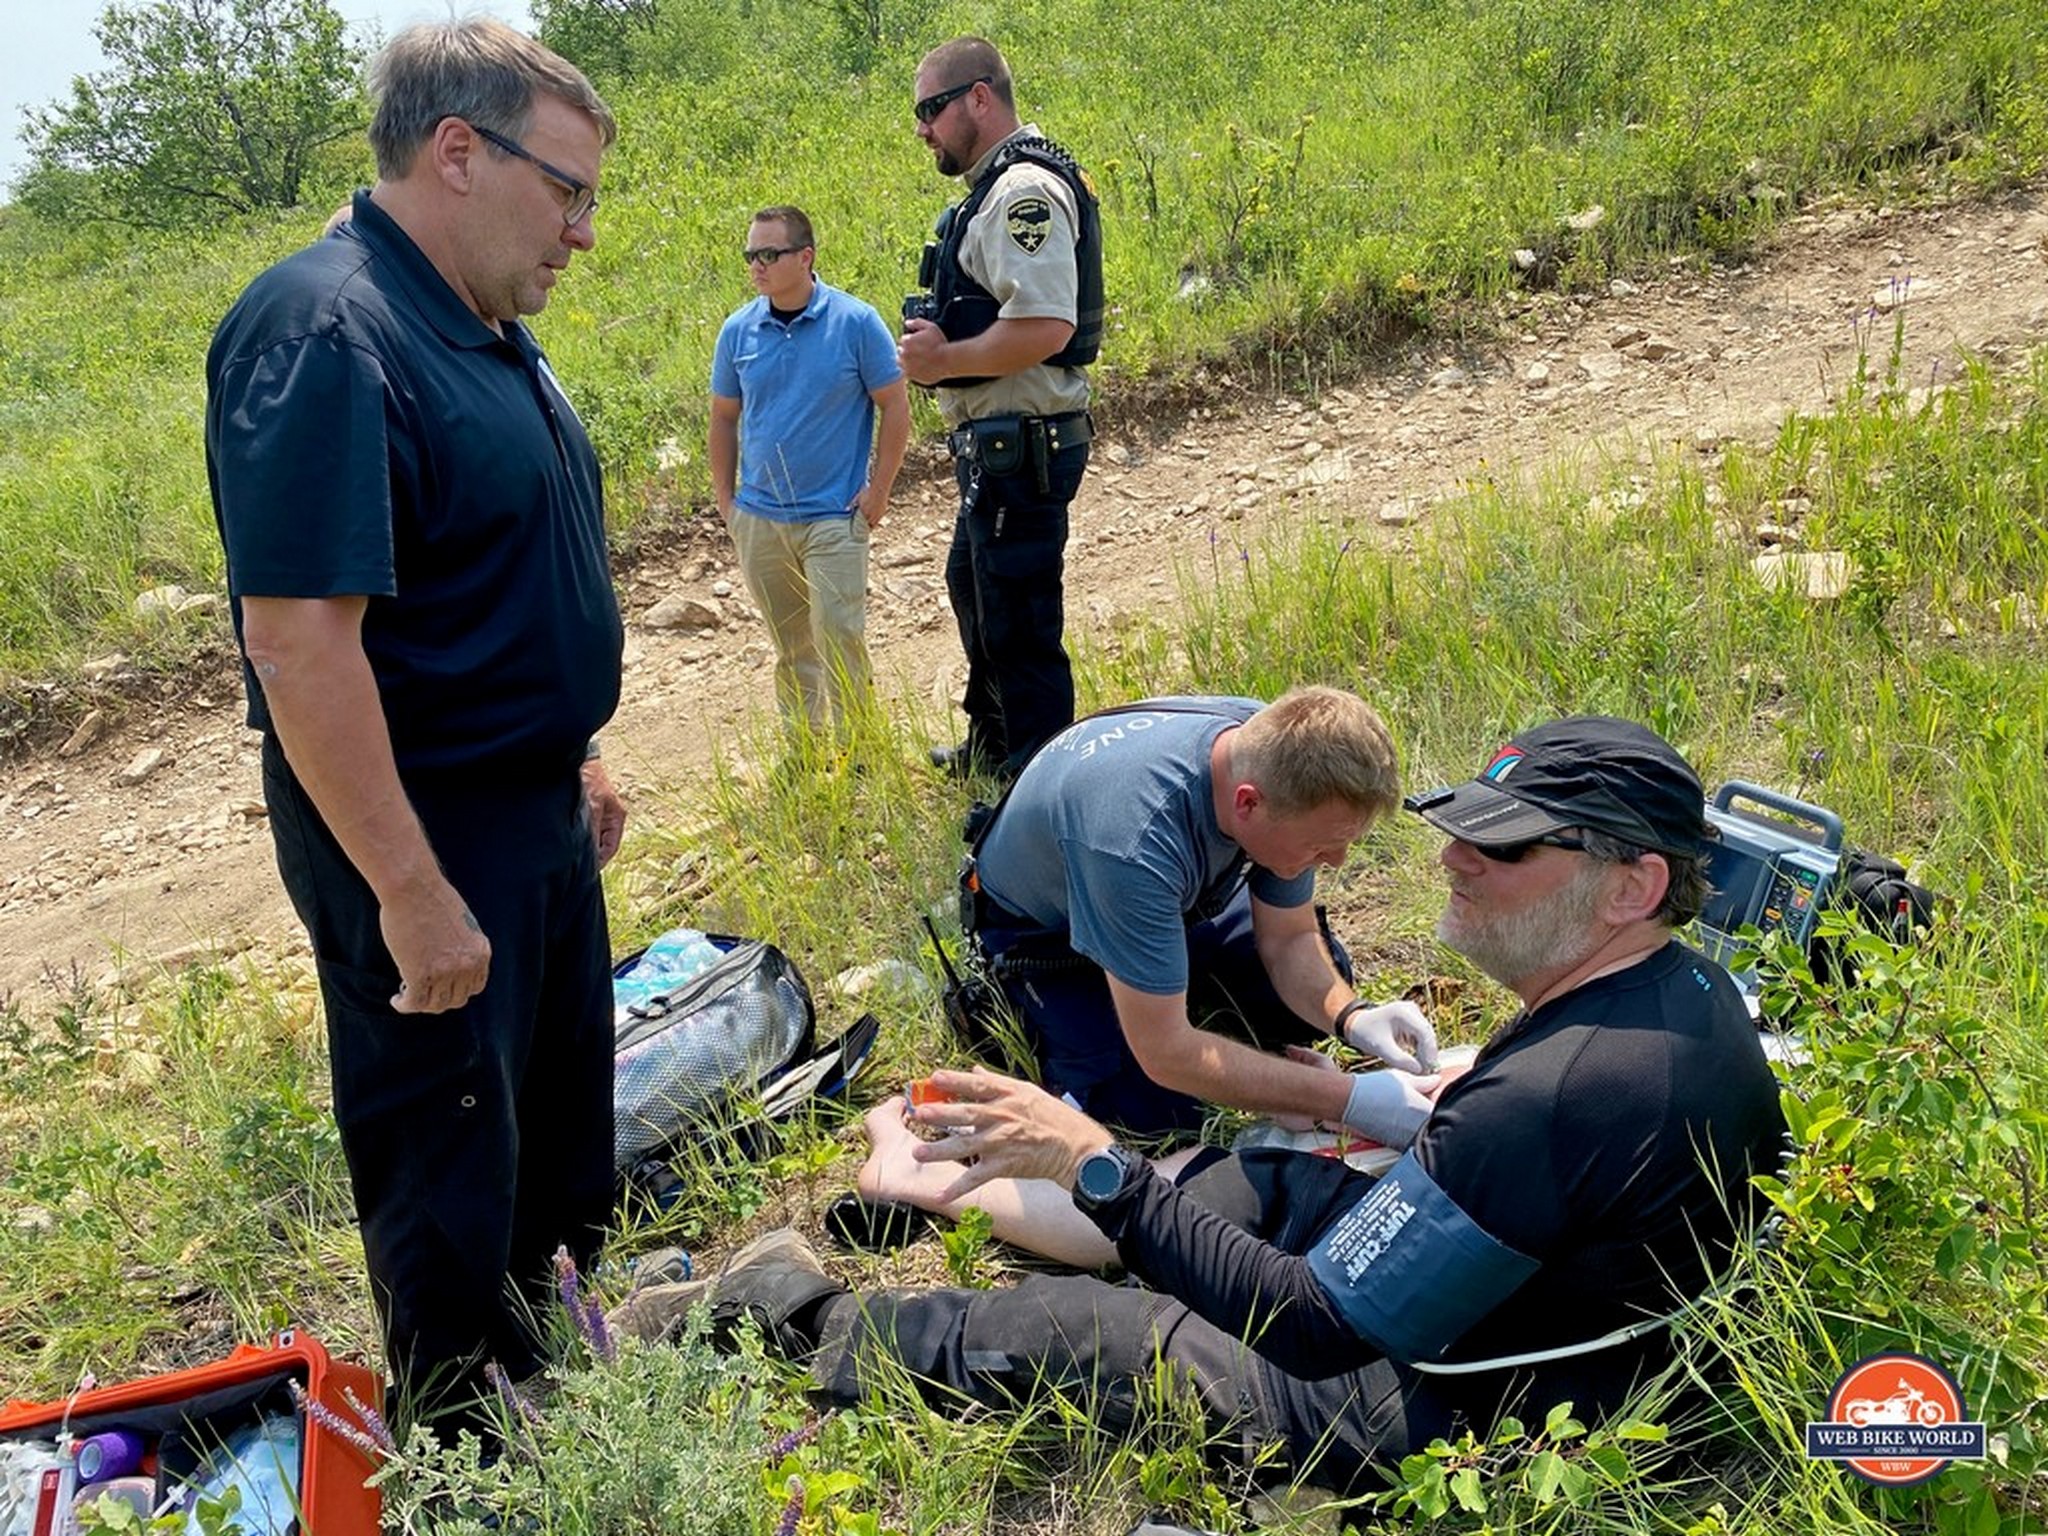 Man with broken ankle sitting down in grass while receiving medical care